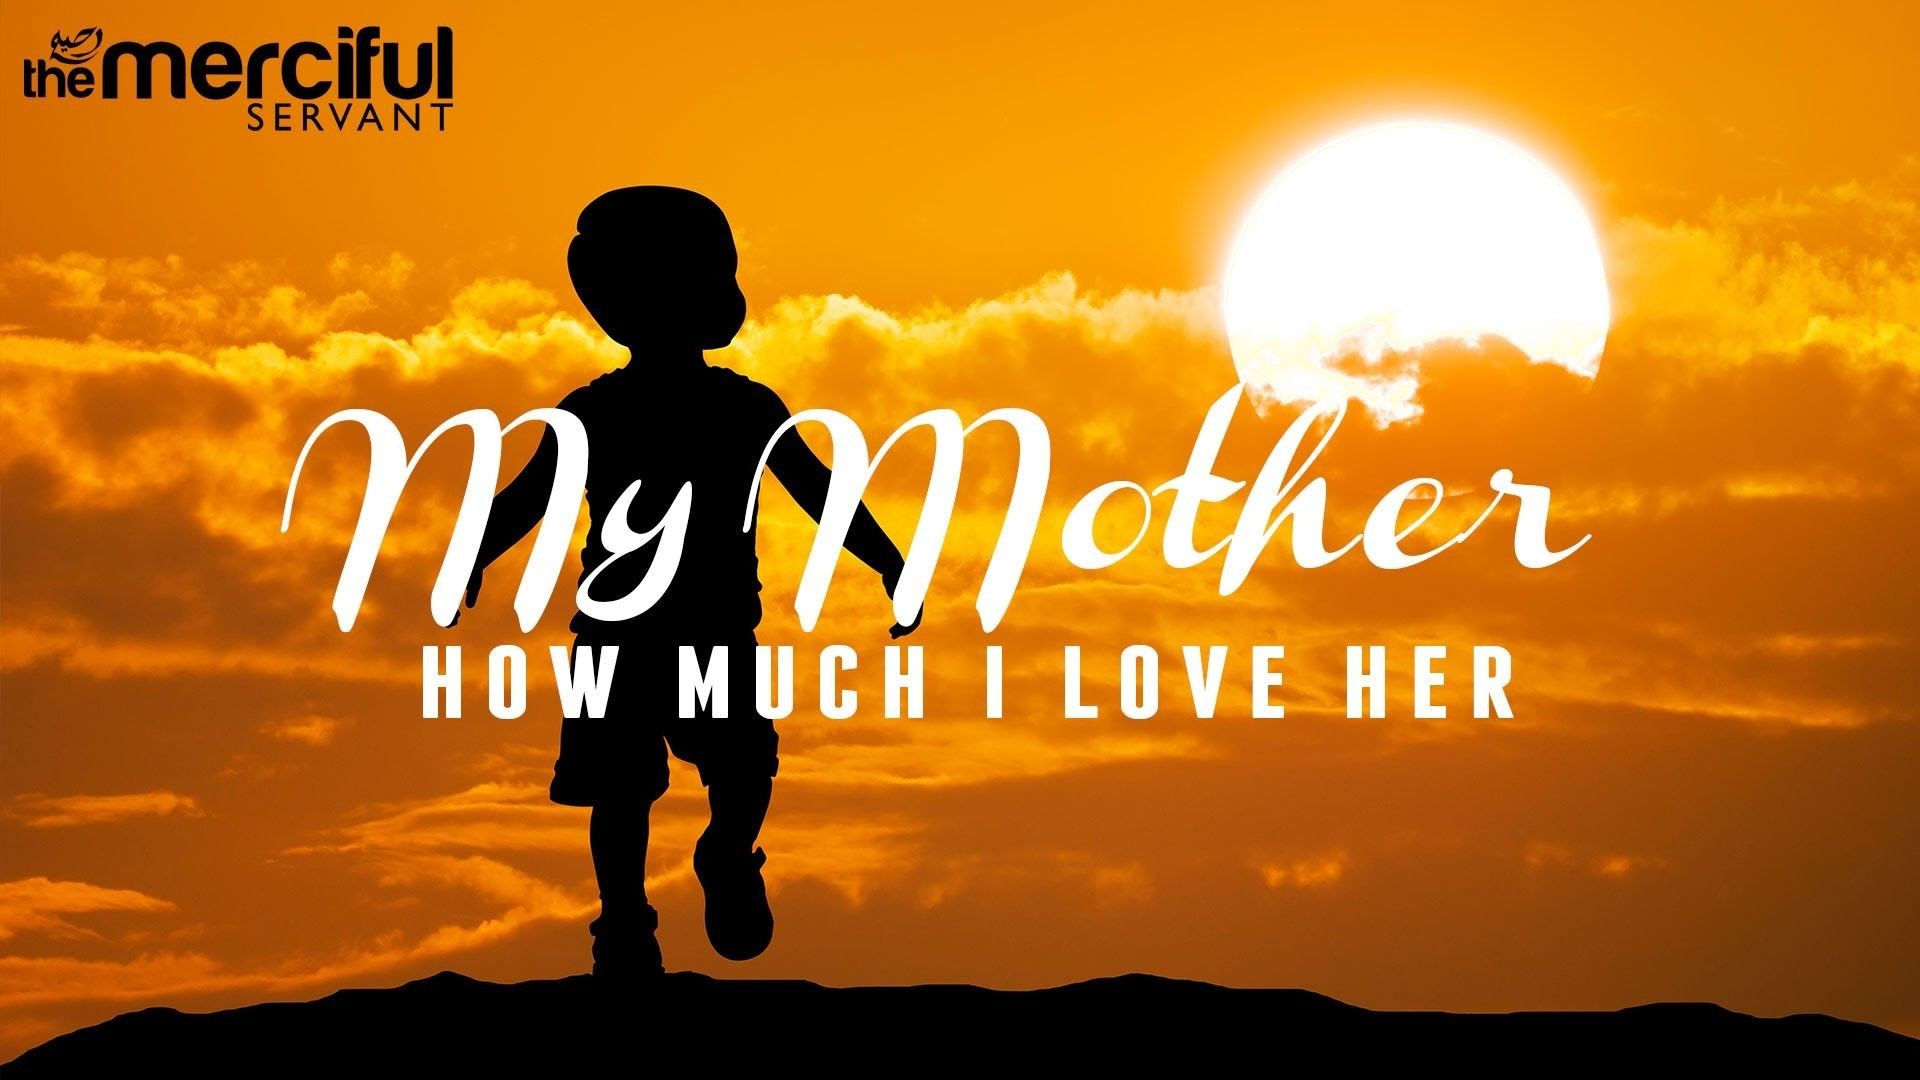 MOTHERS DAY mom mother family 1mday mood love holiday wallpaper  1720x1326   666343  WallpaperUP